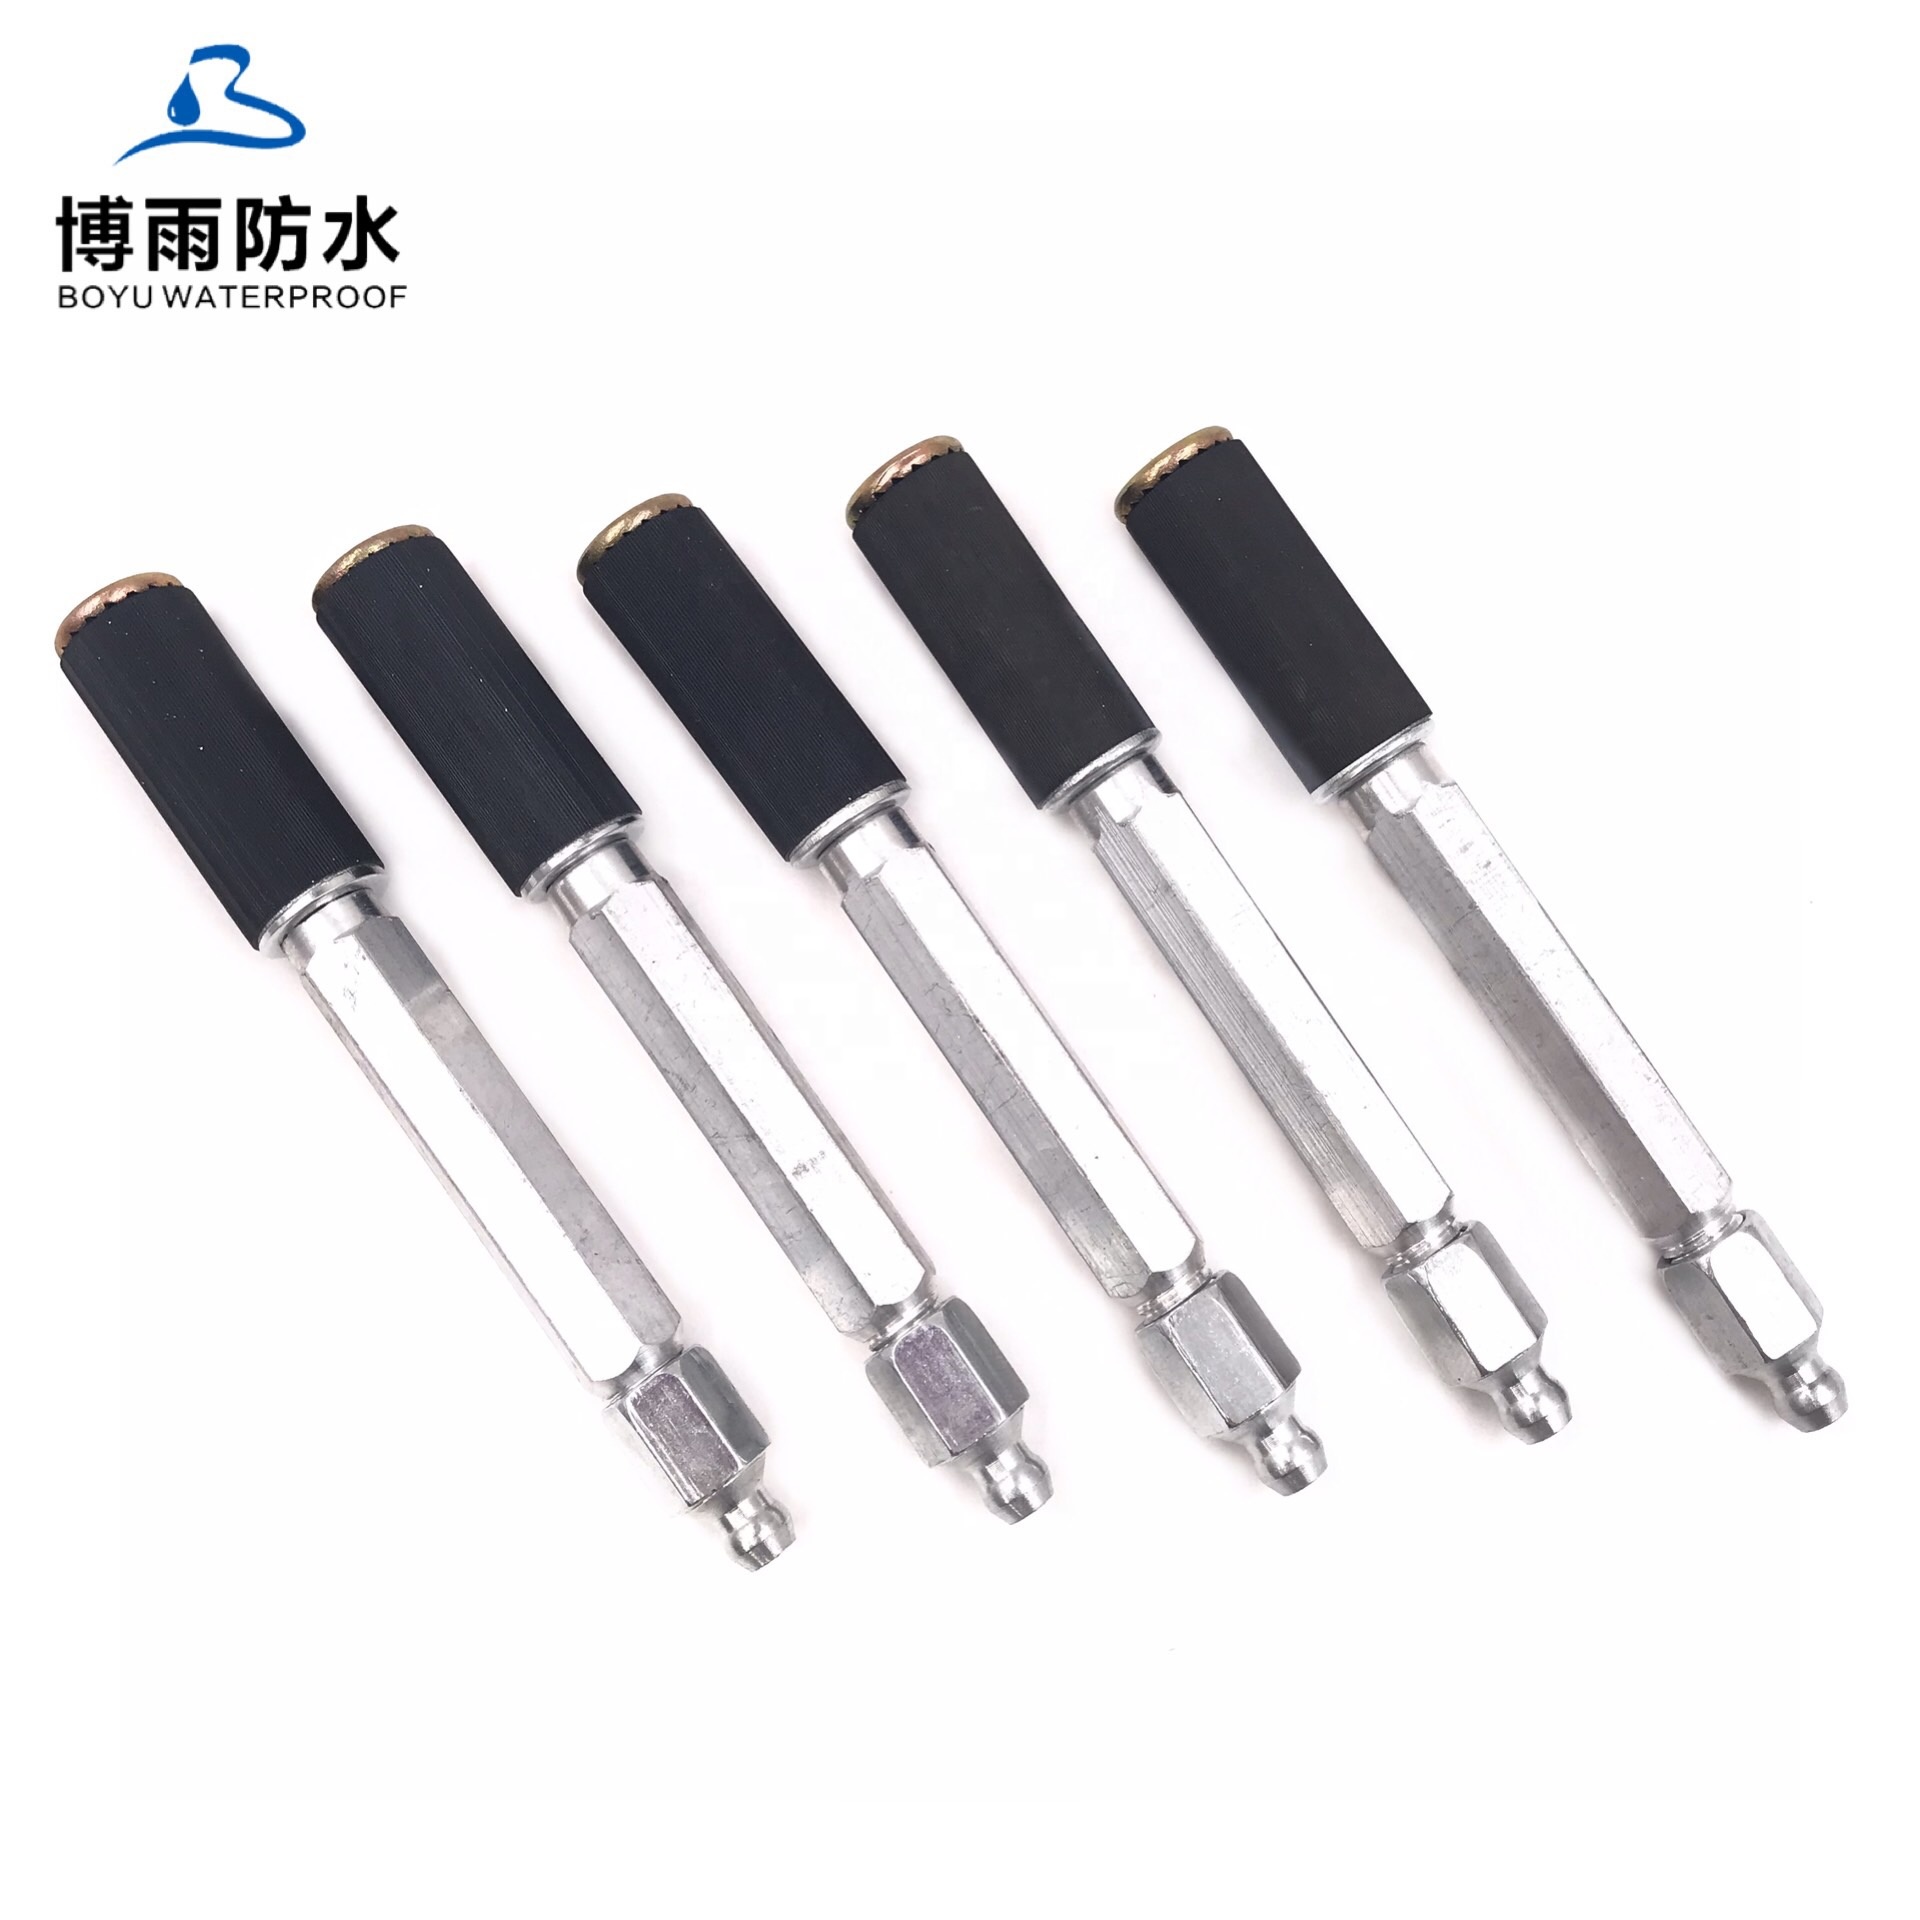 injection grouting packers steel High Pressure Aluminum A10 Grout Injection Packer Featured Image